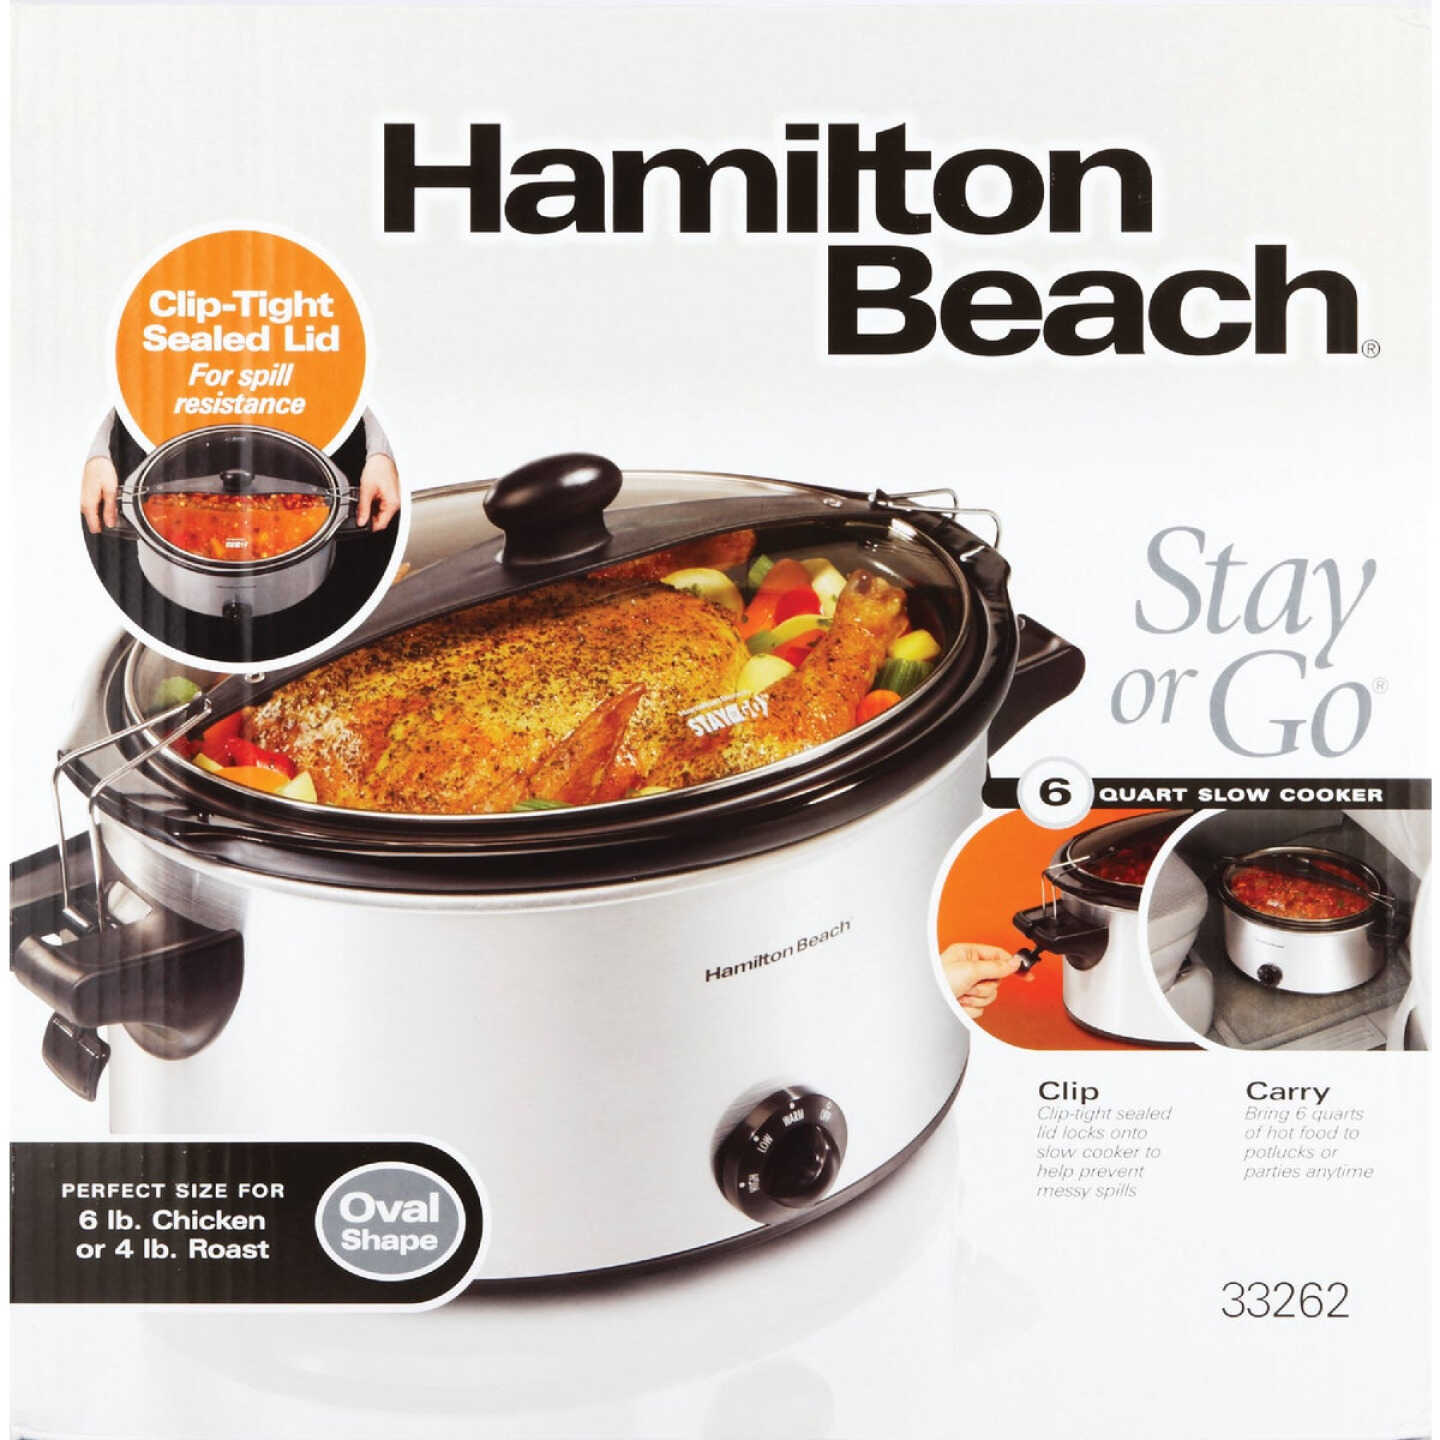 Hamilton Beach Stay or Go 6 Qt. Stainless Steel Slow Cooker - Connolly's